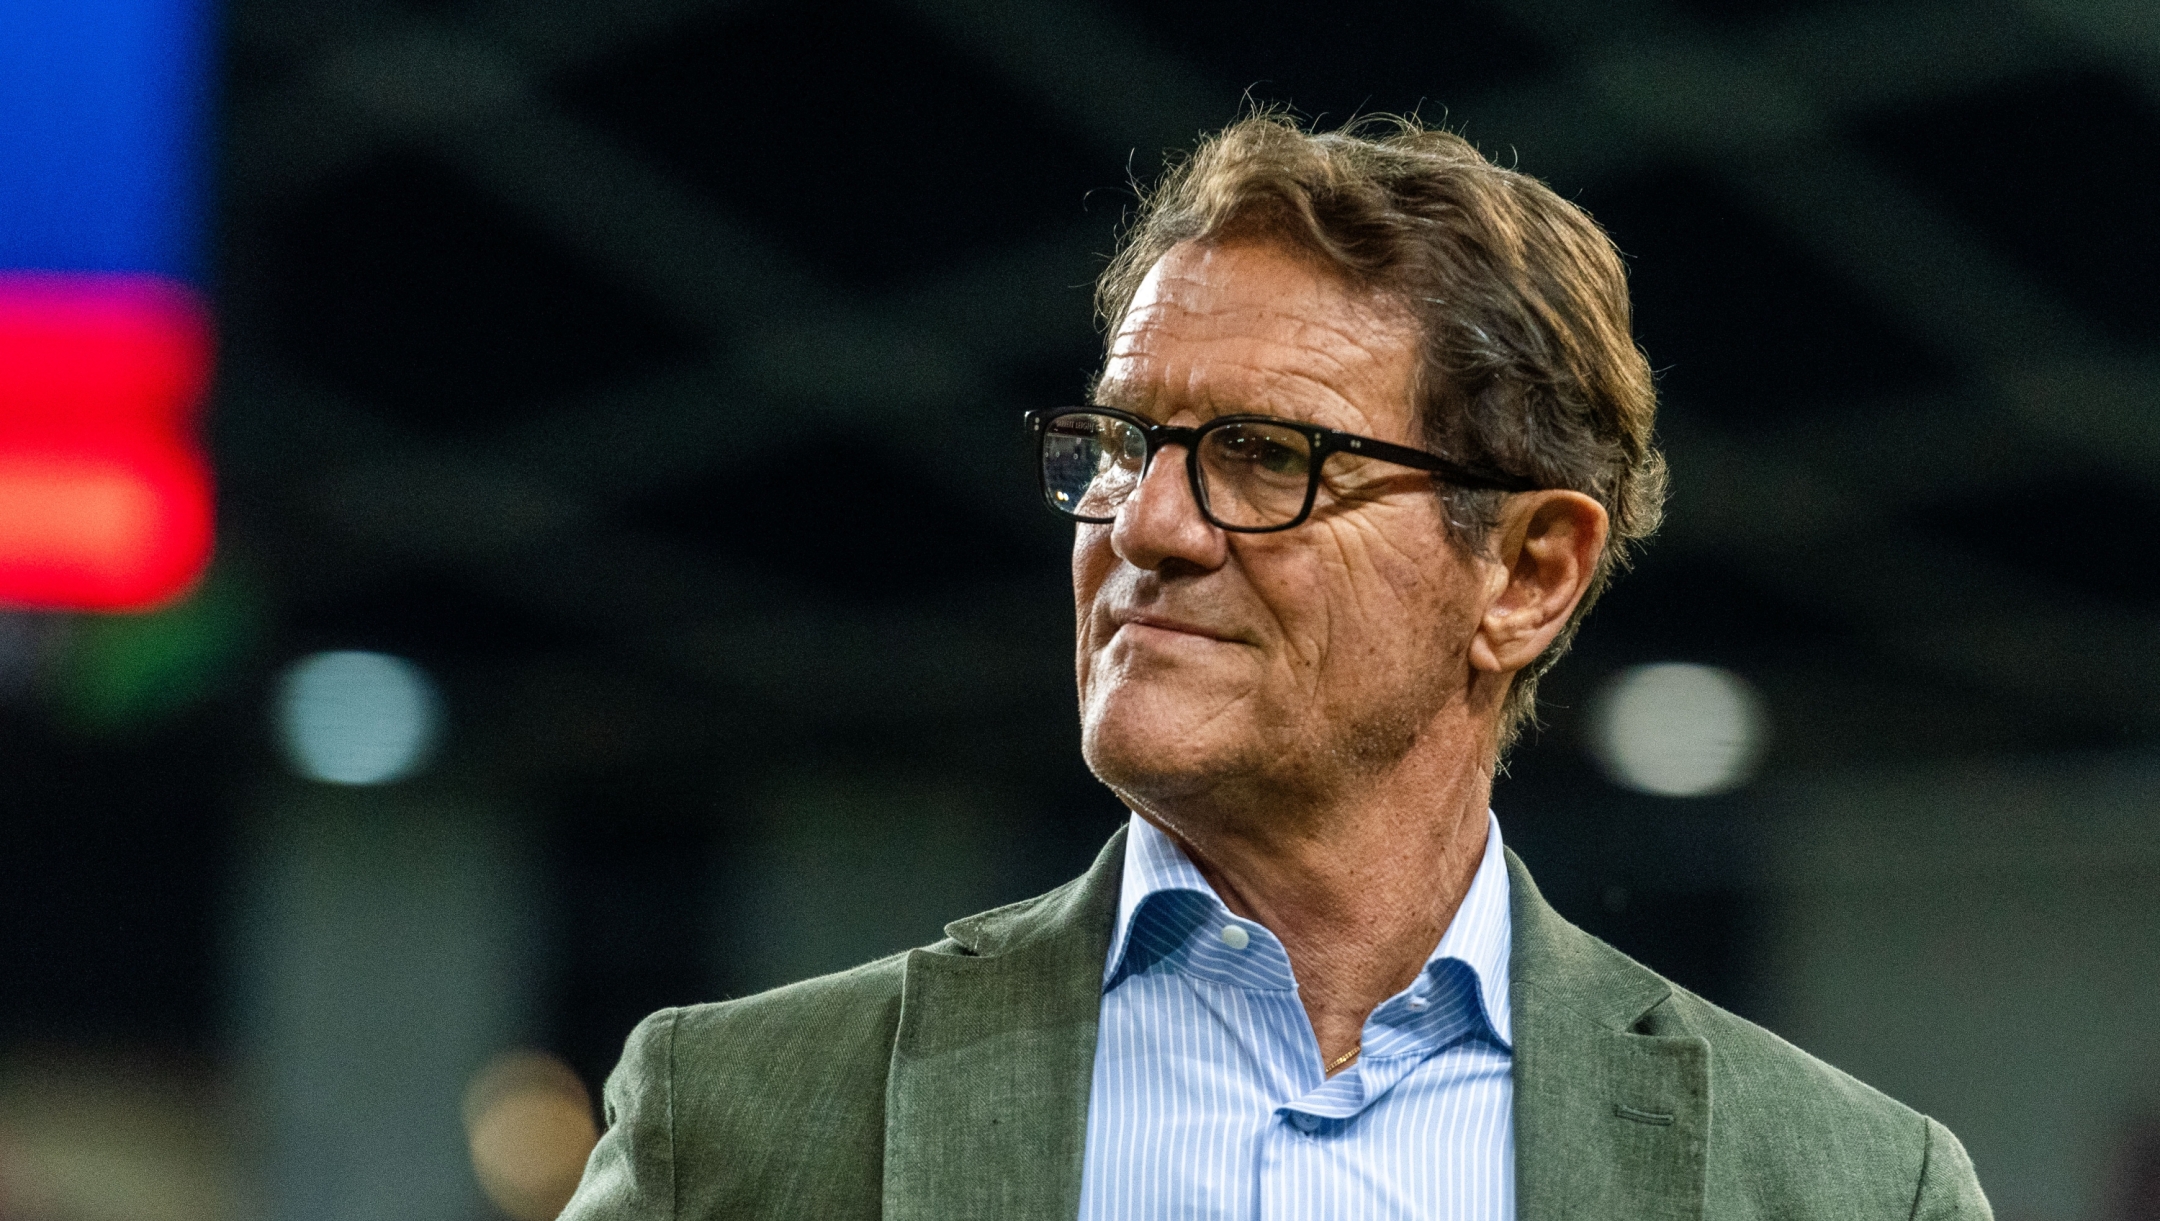 LJUBLJANA, SLOVENIA - SEPTEMBER 15:  Fabio Capello of Italy managing the Red Team during a charity match for the Slovenian flood victims on September 15, 2023 in Ljubljana, Slovenia. In August 2023 major floods occurred in two-thirds of the Slovenian territory due to heavy rain. Deemed as the worst natural disaster of the country. (Photo by Jurij Kodrun/Getty Images)